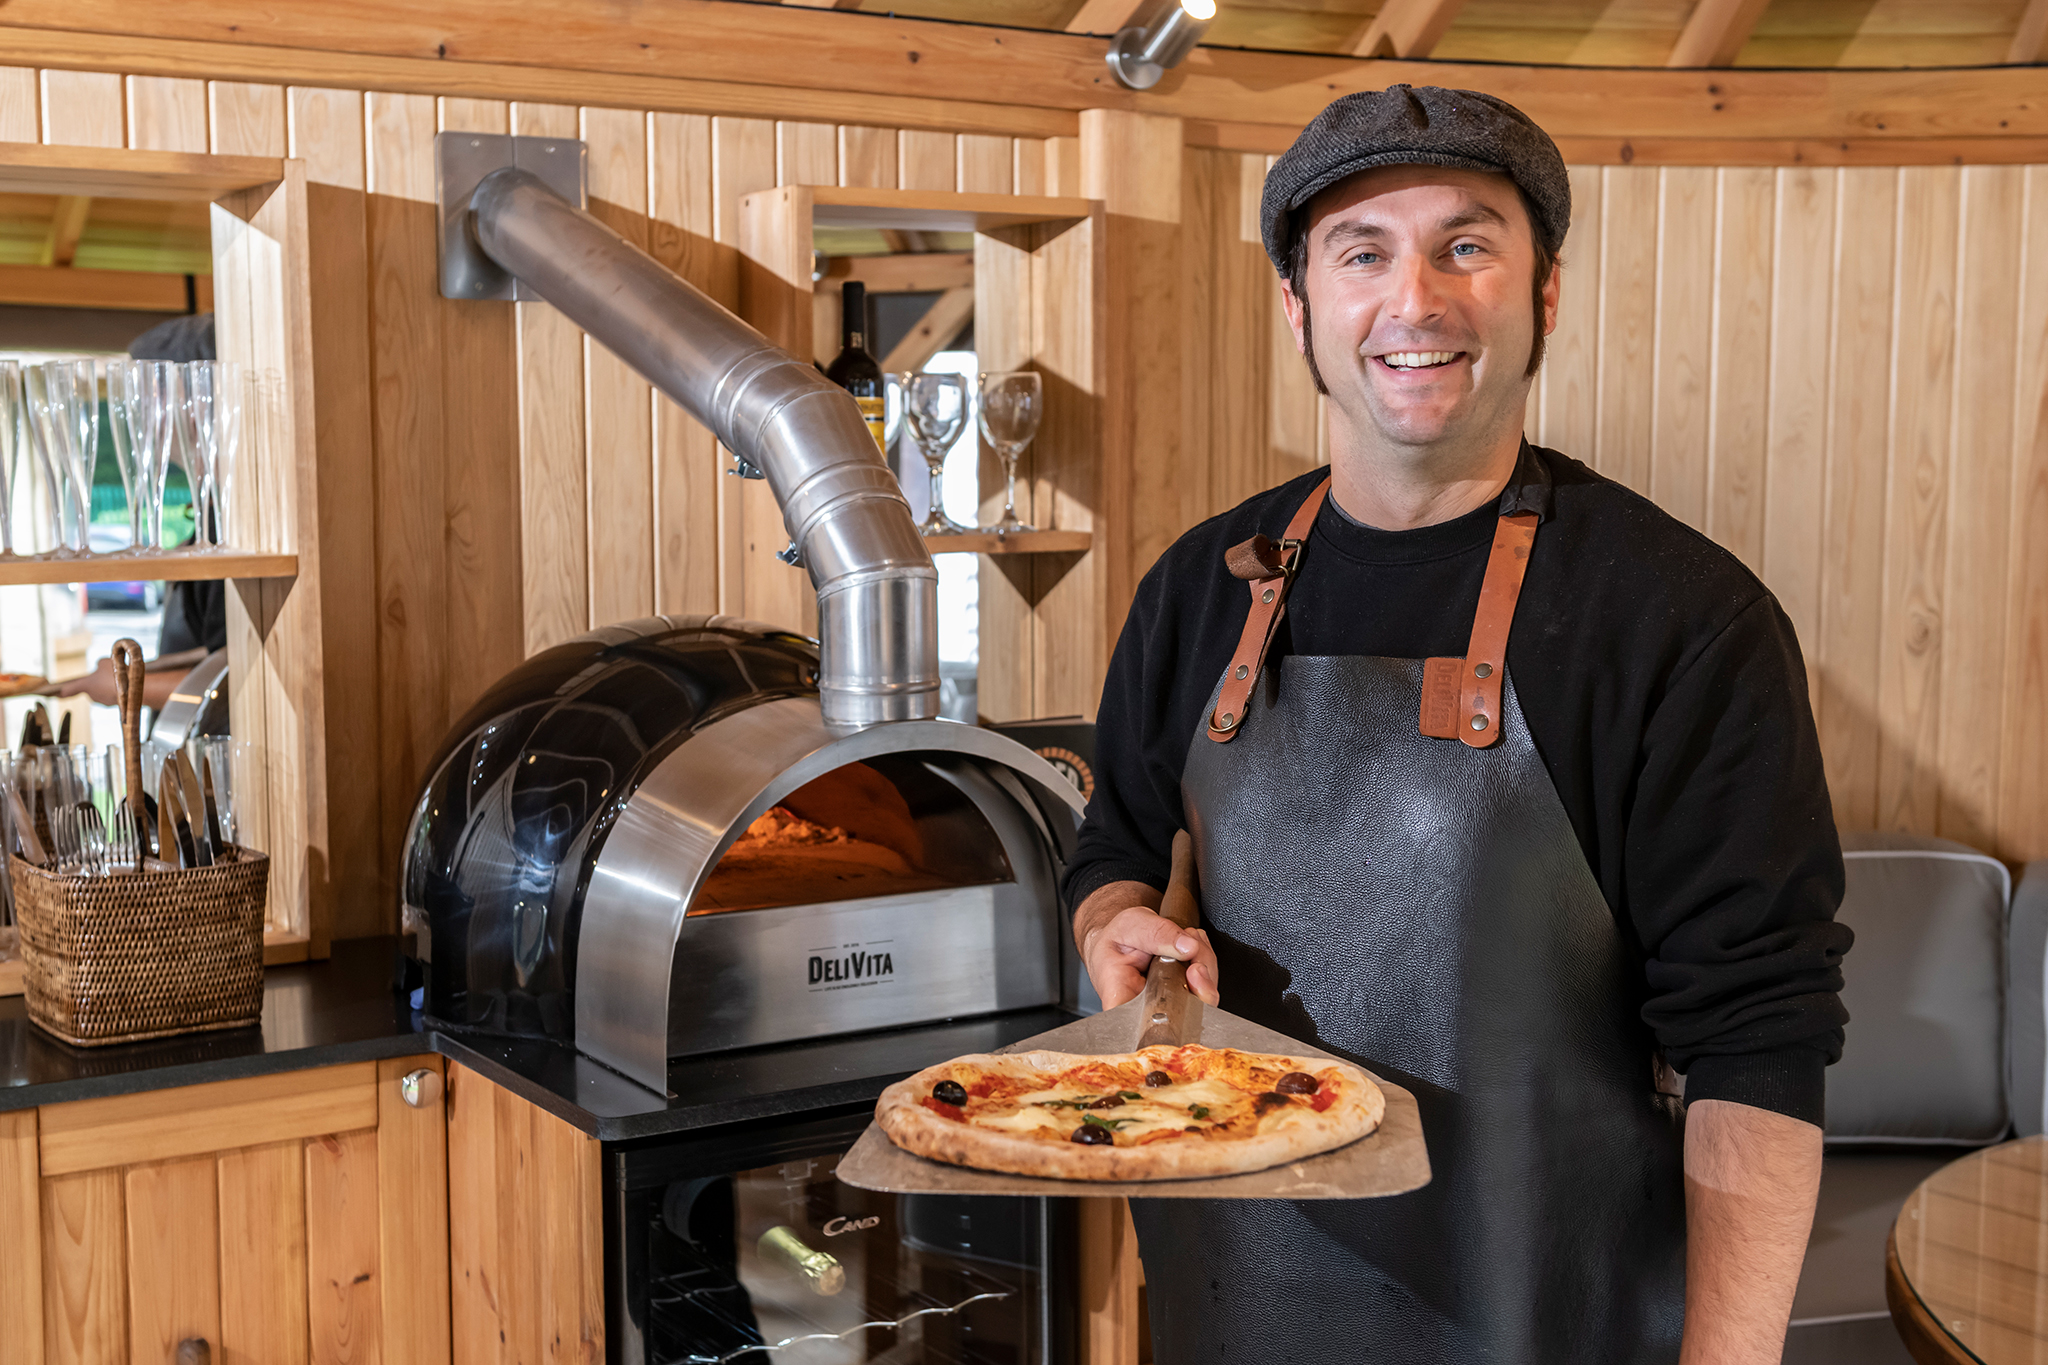 A Delivita chef presents a pizza he's just made in a Crown Pavilions garden room.